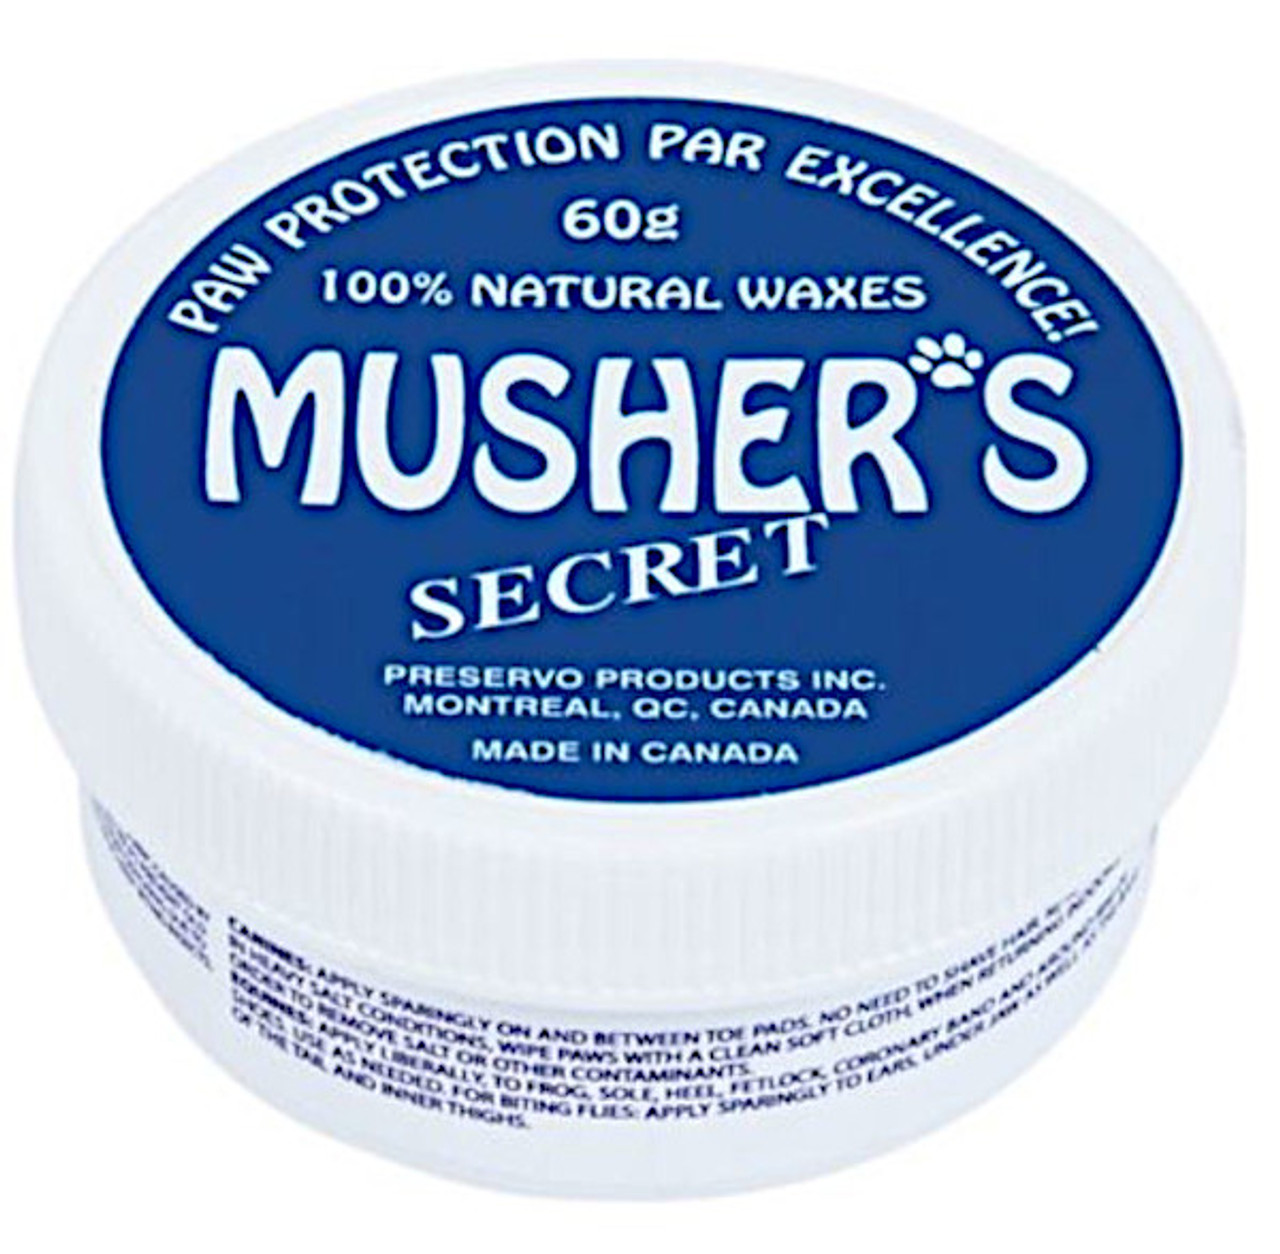 mushers secret 60 gram jar - for paw pads - soothes and heals